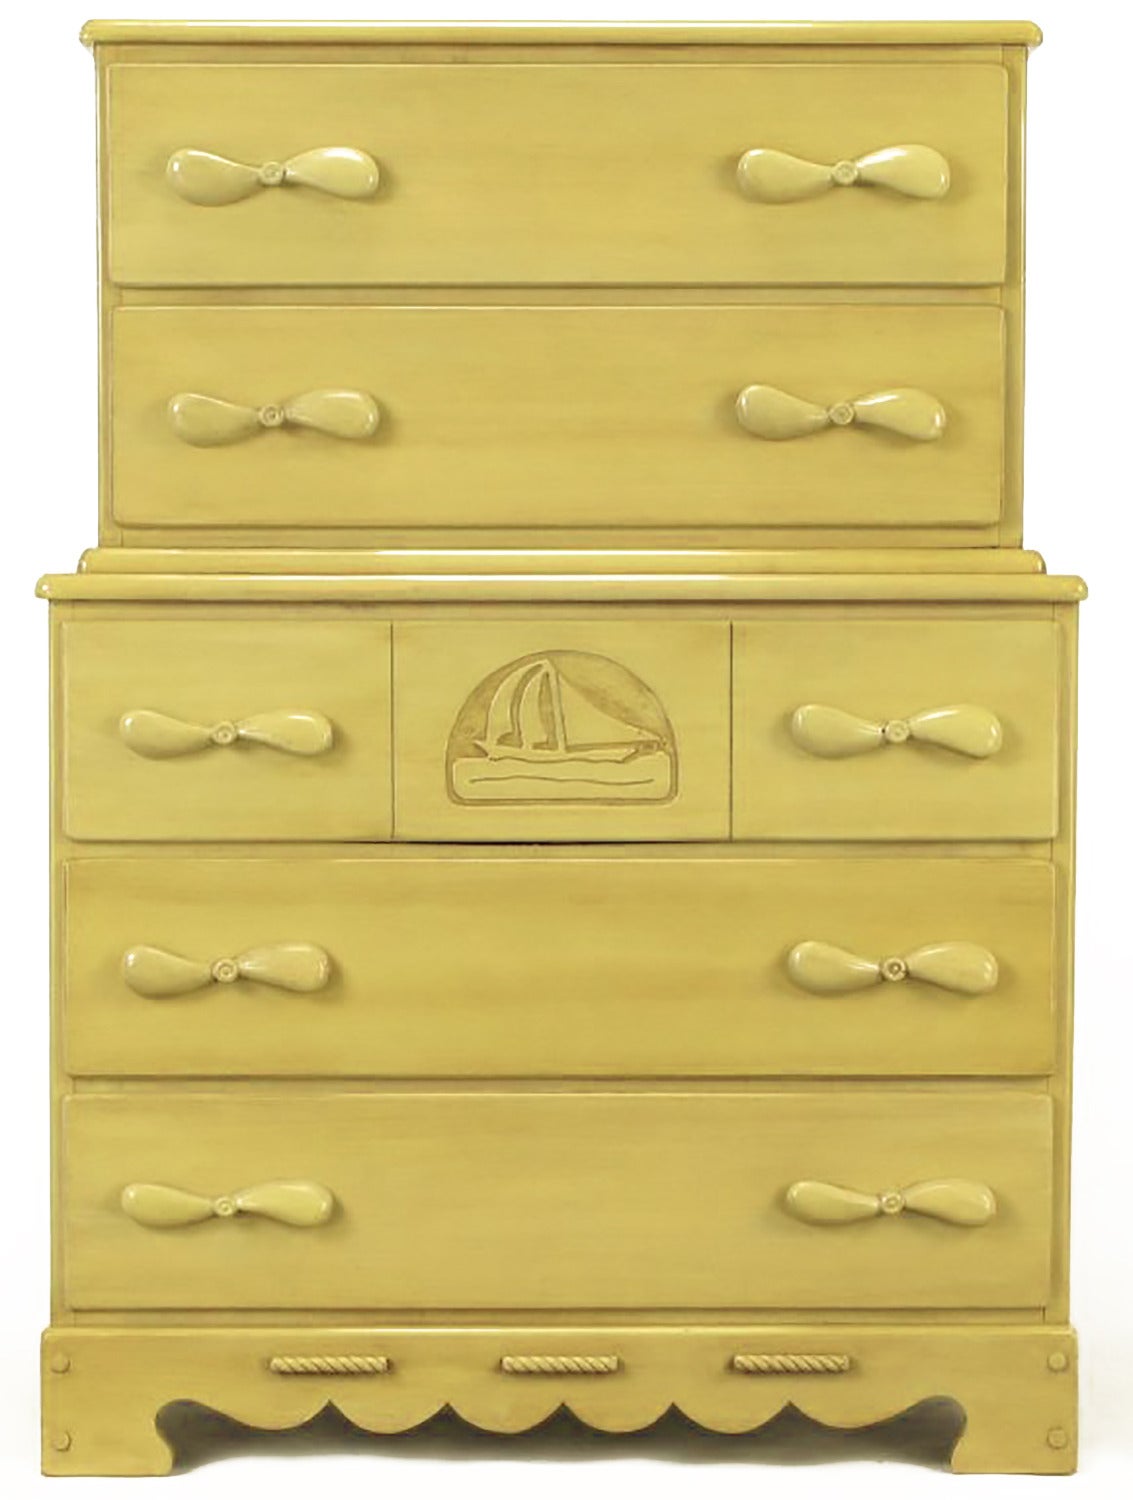 American Pair of Five-Drawer Tall Chests with Propeller Pulls and Sailboat Reliefs